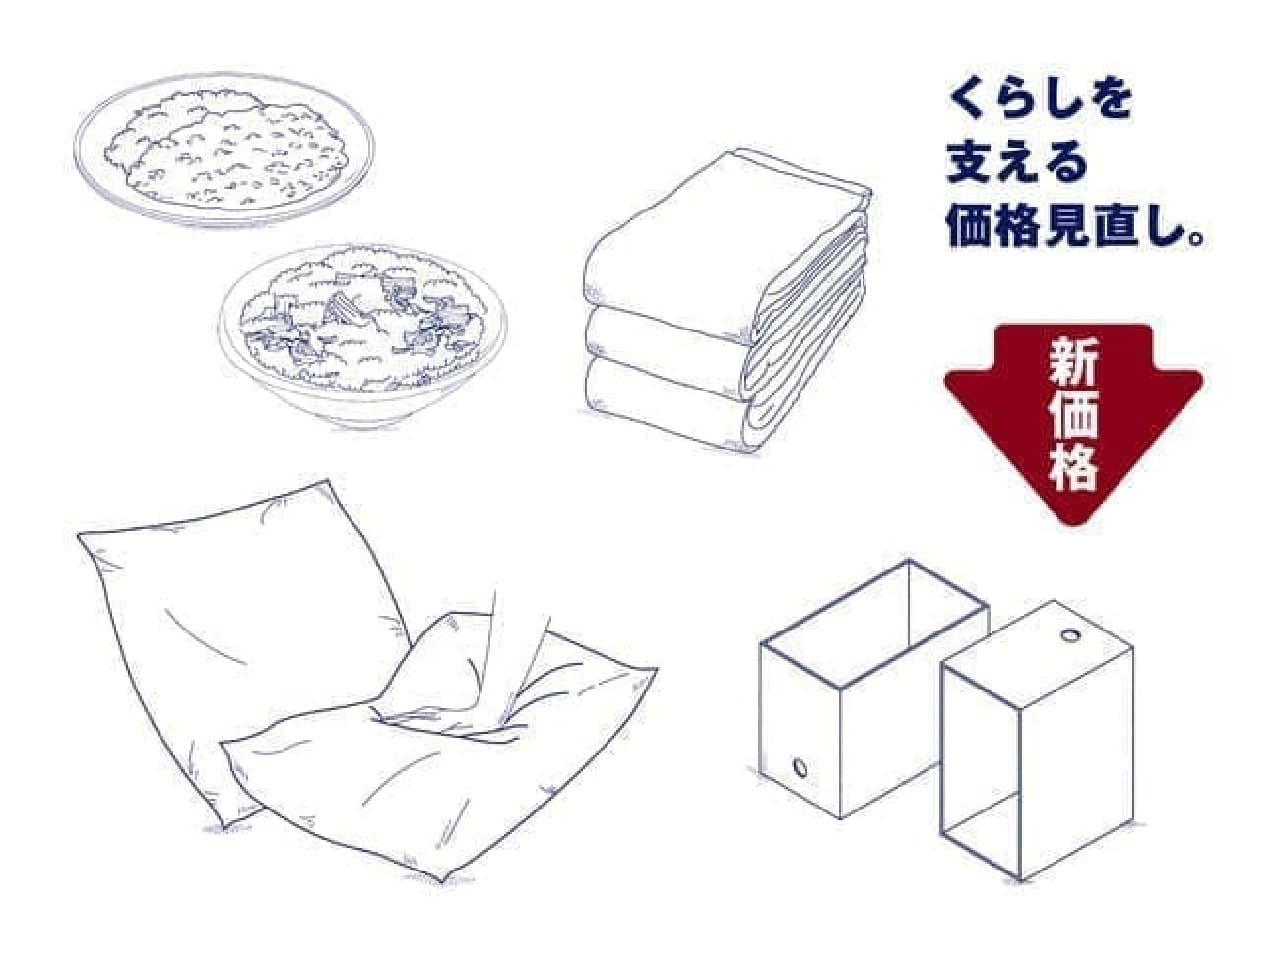 Price cuts such as MUJI "Silicone Cooking Spoon" and "Curry Keema Making the Most of Materials"! For about 200 items